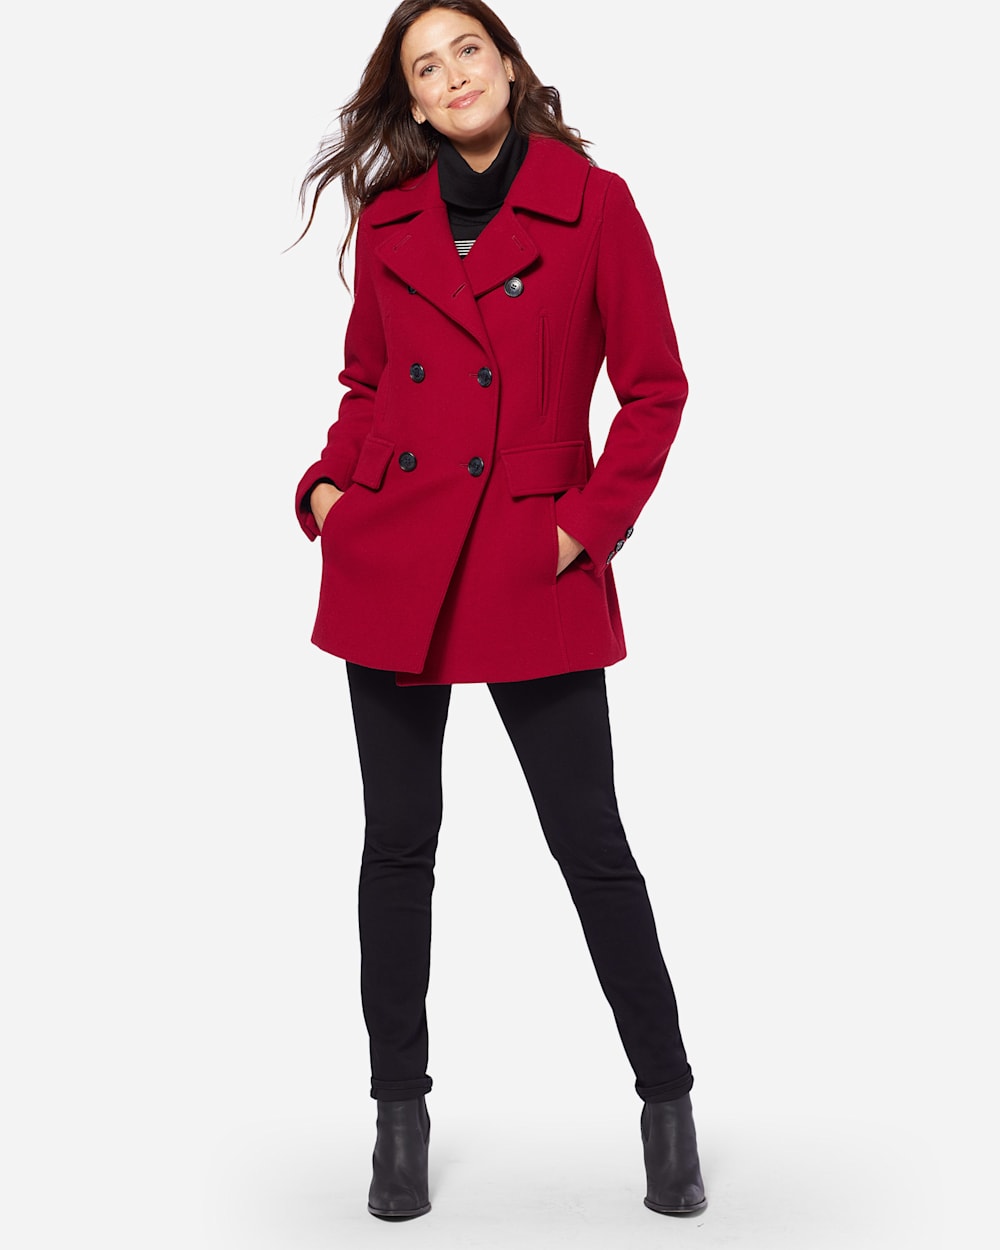 ADDITIONAL VIEW OF WOMEN'S WOOL PEA COAT IN RED image number 2